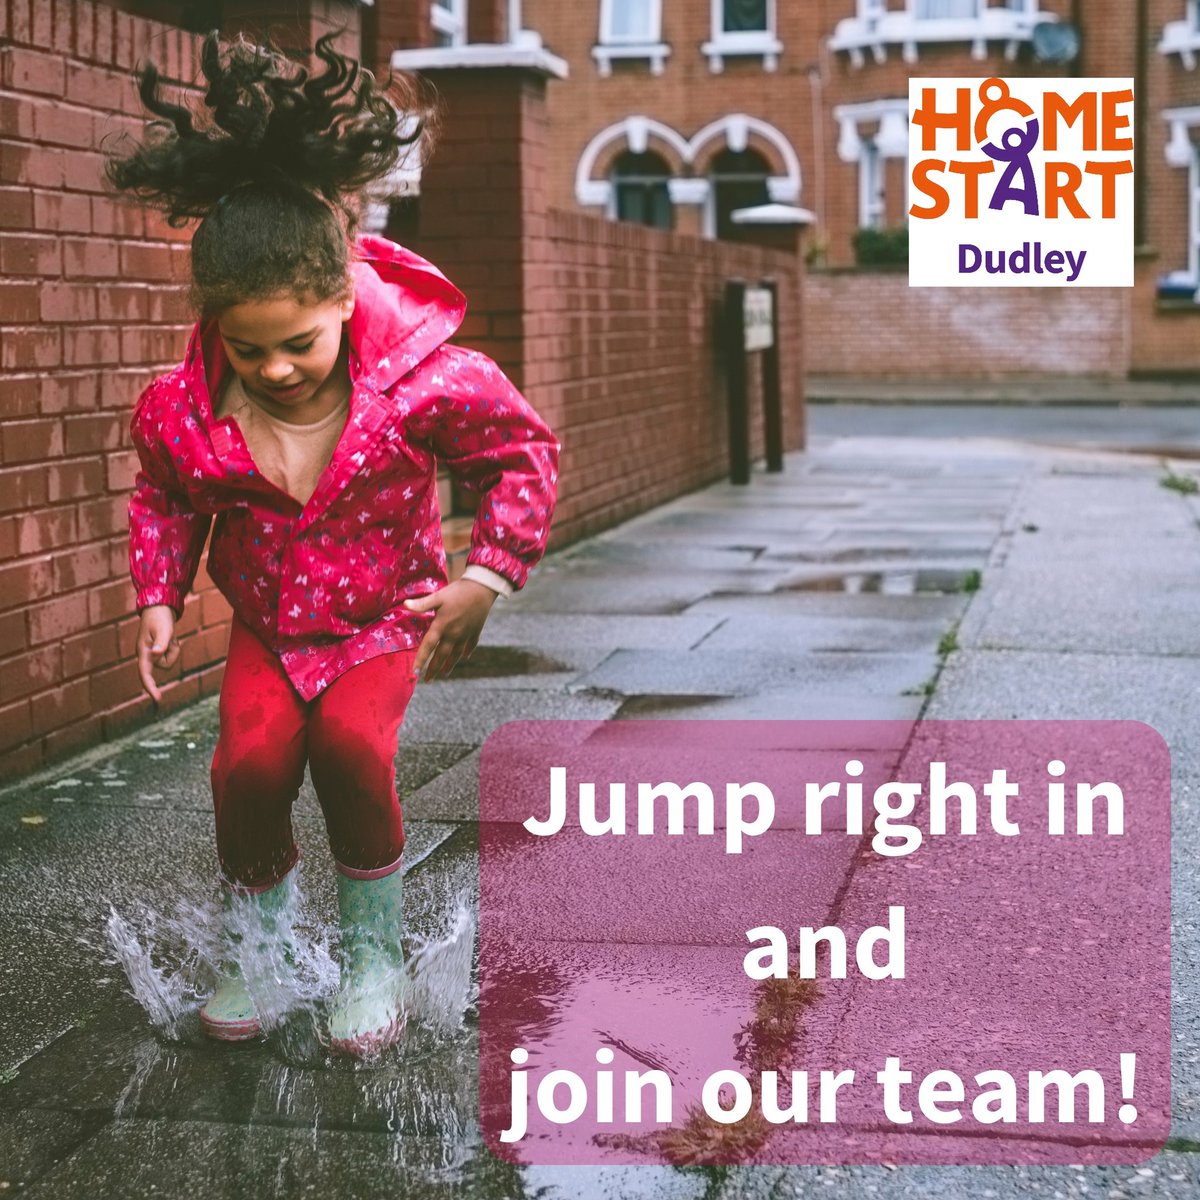 We've a new volunteer training course starting soon & are looking for new volunteers to join our team. Have you been thinking about volunteering in your local community? Get in touch we'd love to hear from you. Call 01384 482733 or email admin@home-startdudley.org.uk. #volunteer